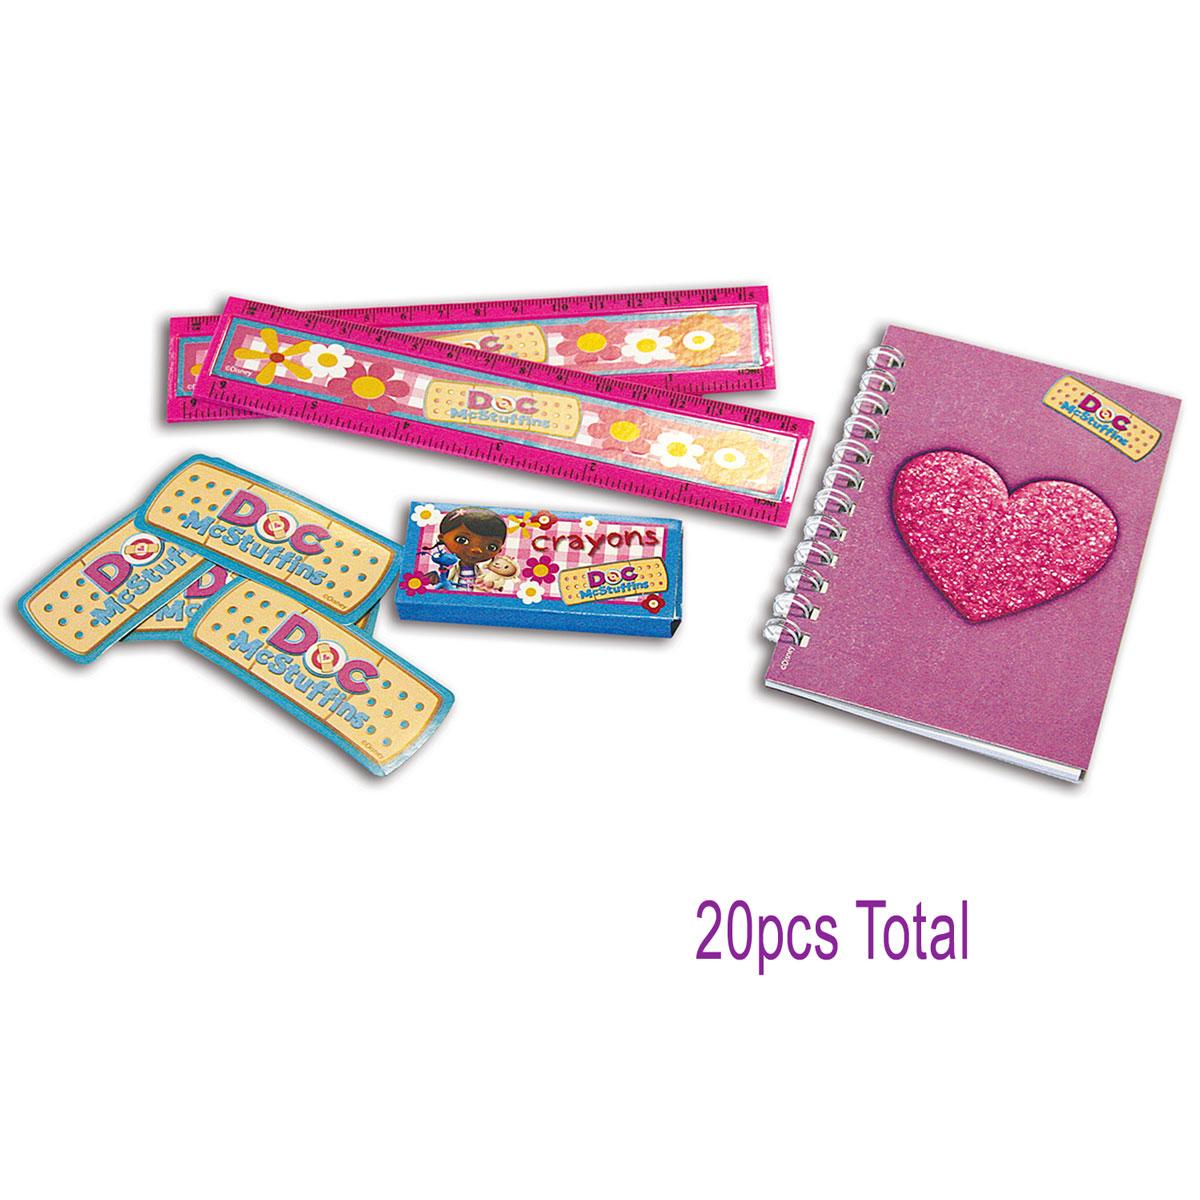 Doc McStuffins Stationery Favour Pack - 20pcs licensed by Disney by Amscan 996910 available here at Karnival Costumes online party shop